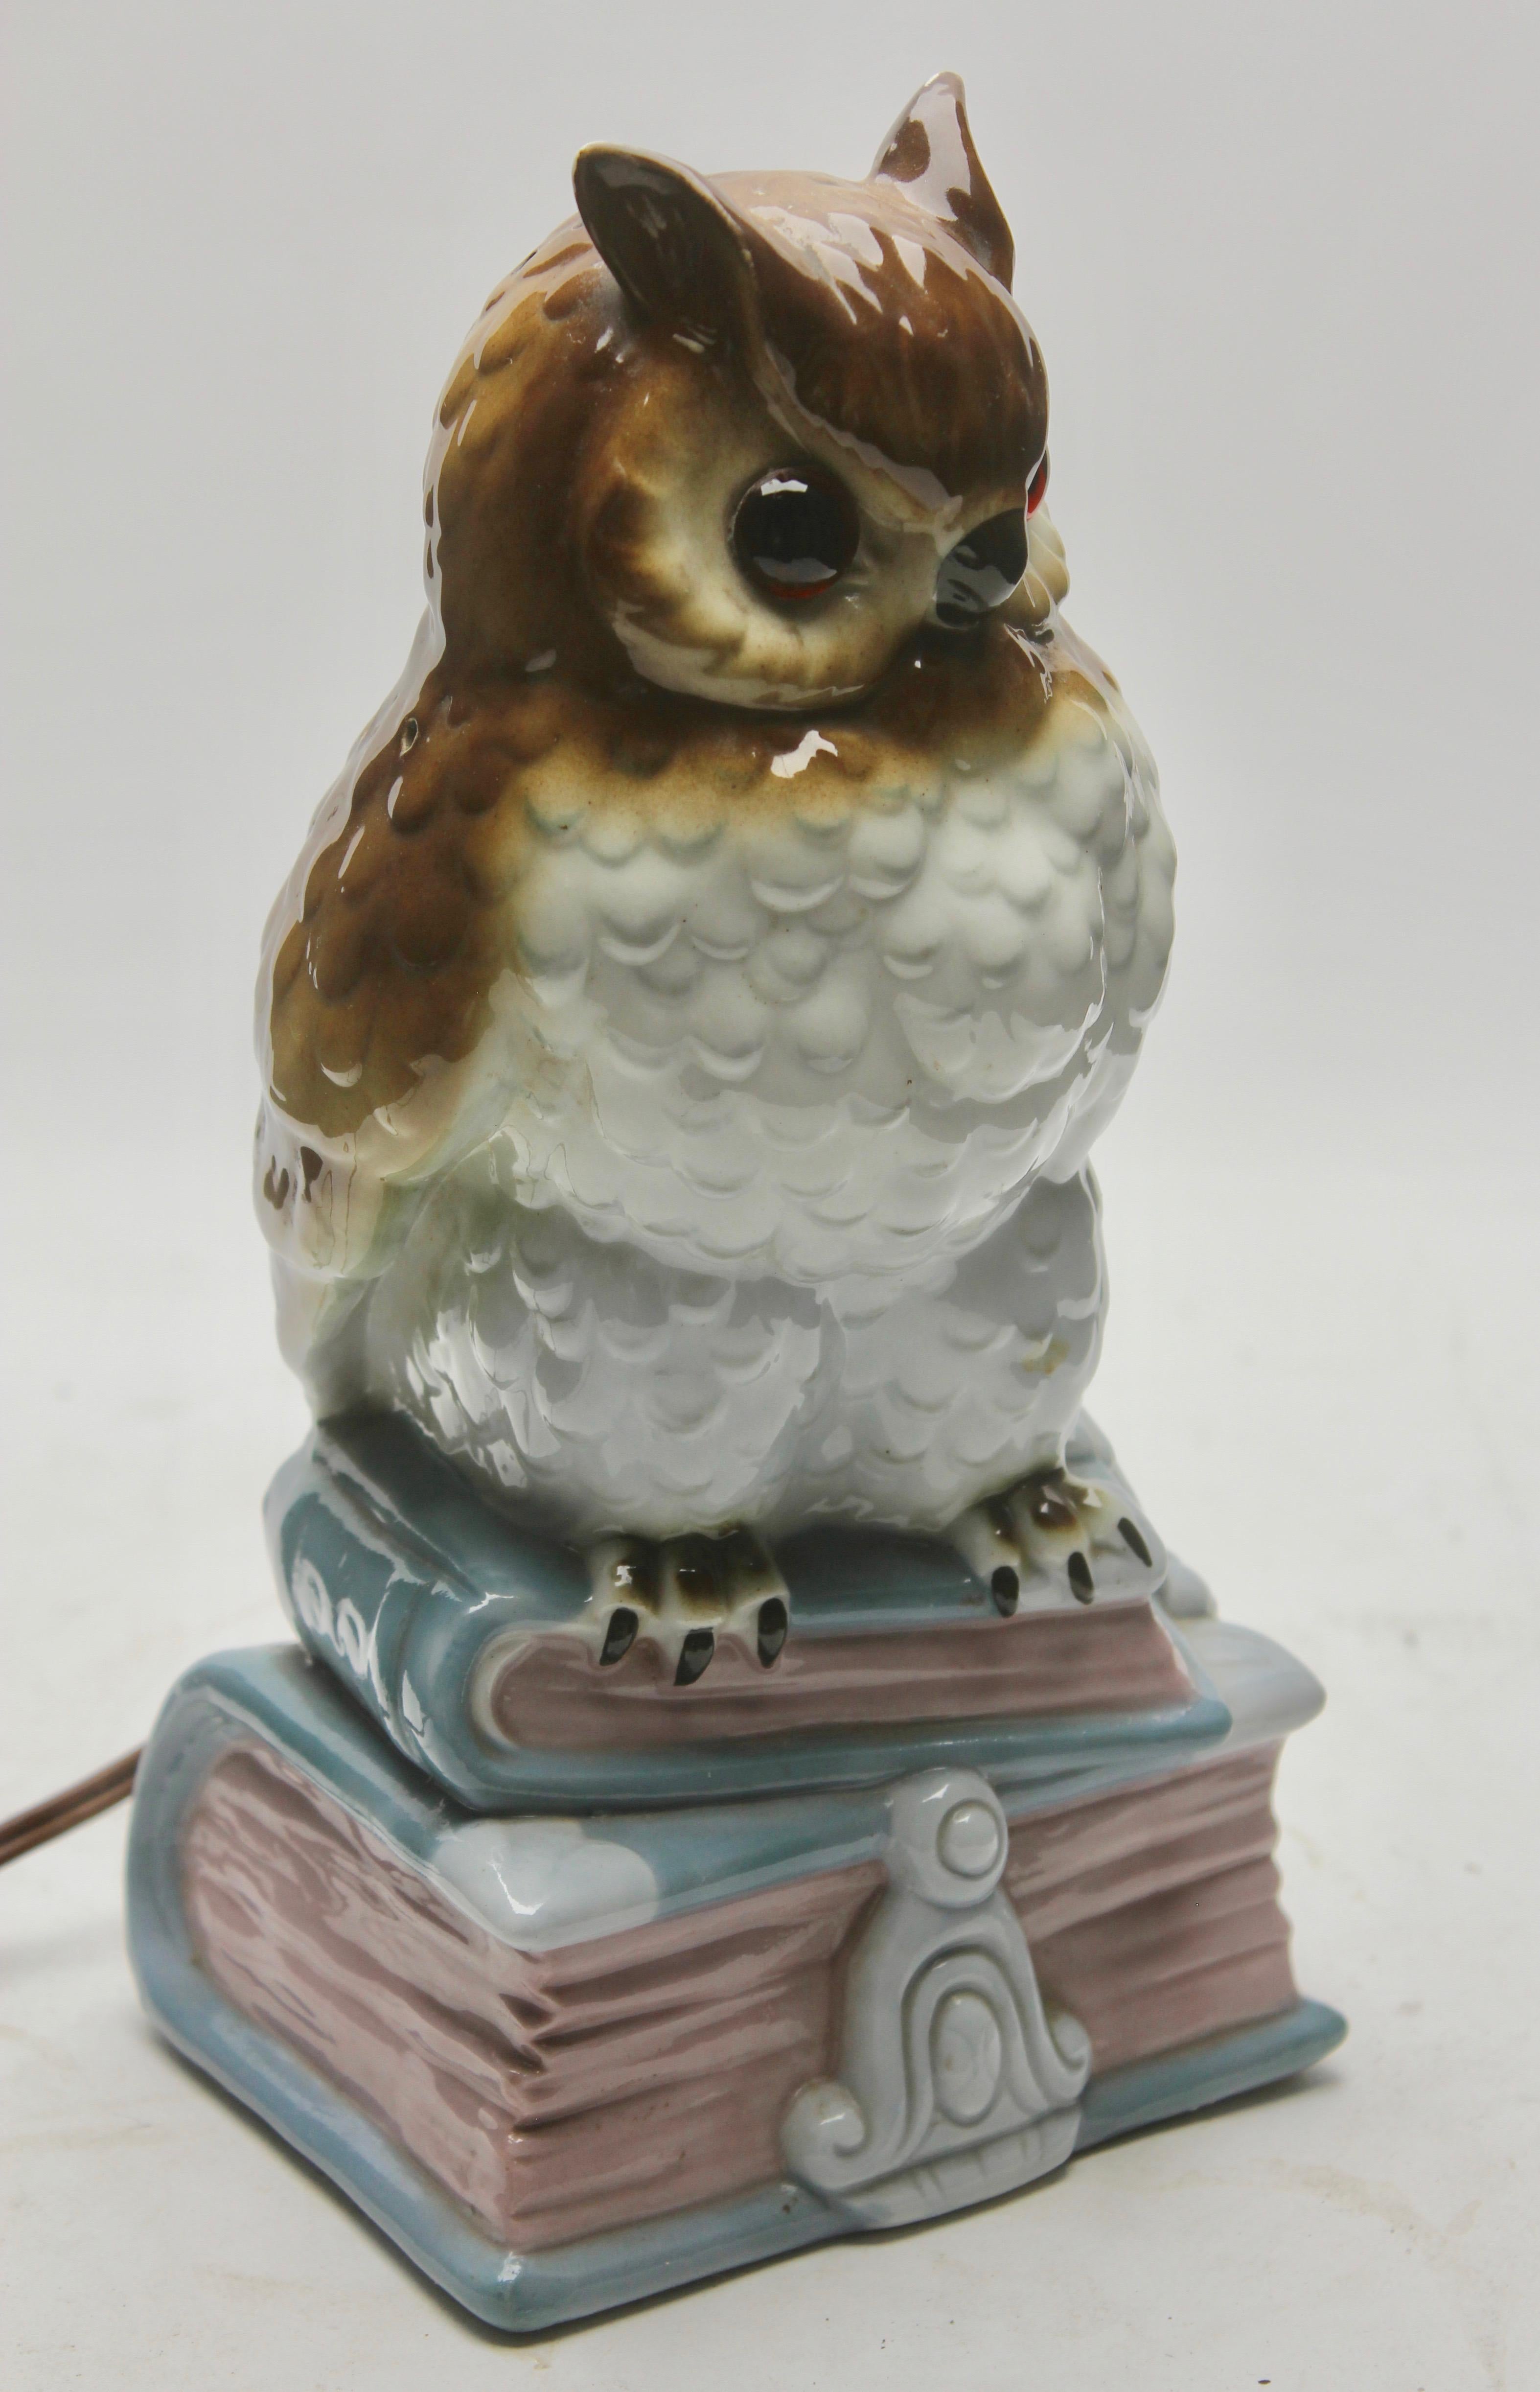 Porcelain Figurine, Air Purifier or Table Lamp, Owl or Eagle Owl from the 1930 In Good Condition For Sale In Verviers, BE